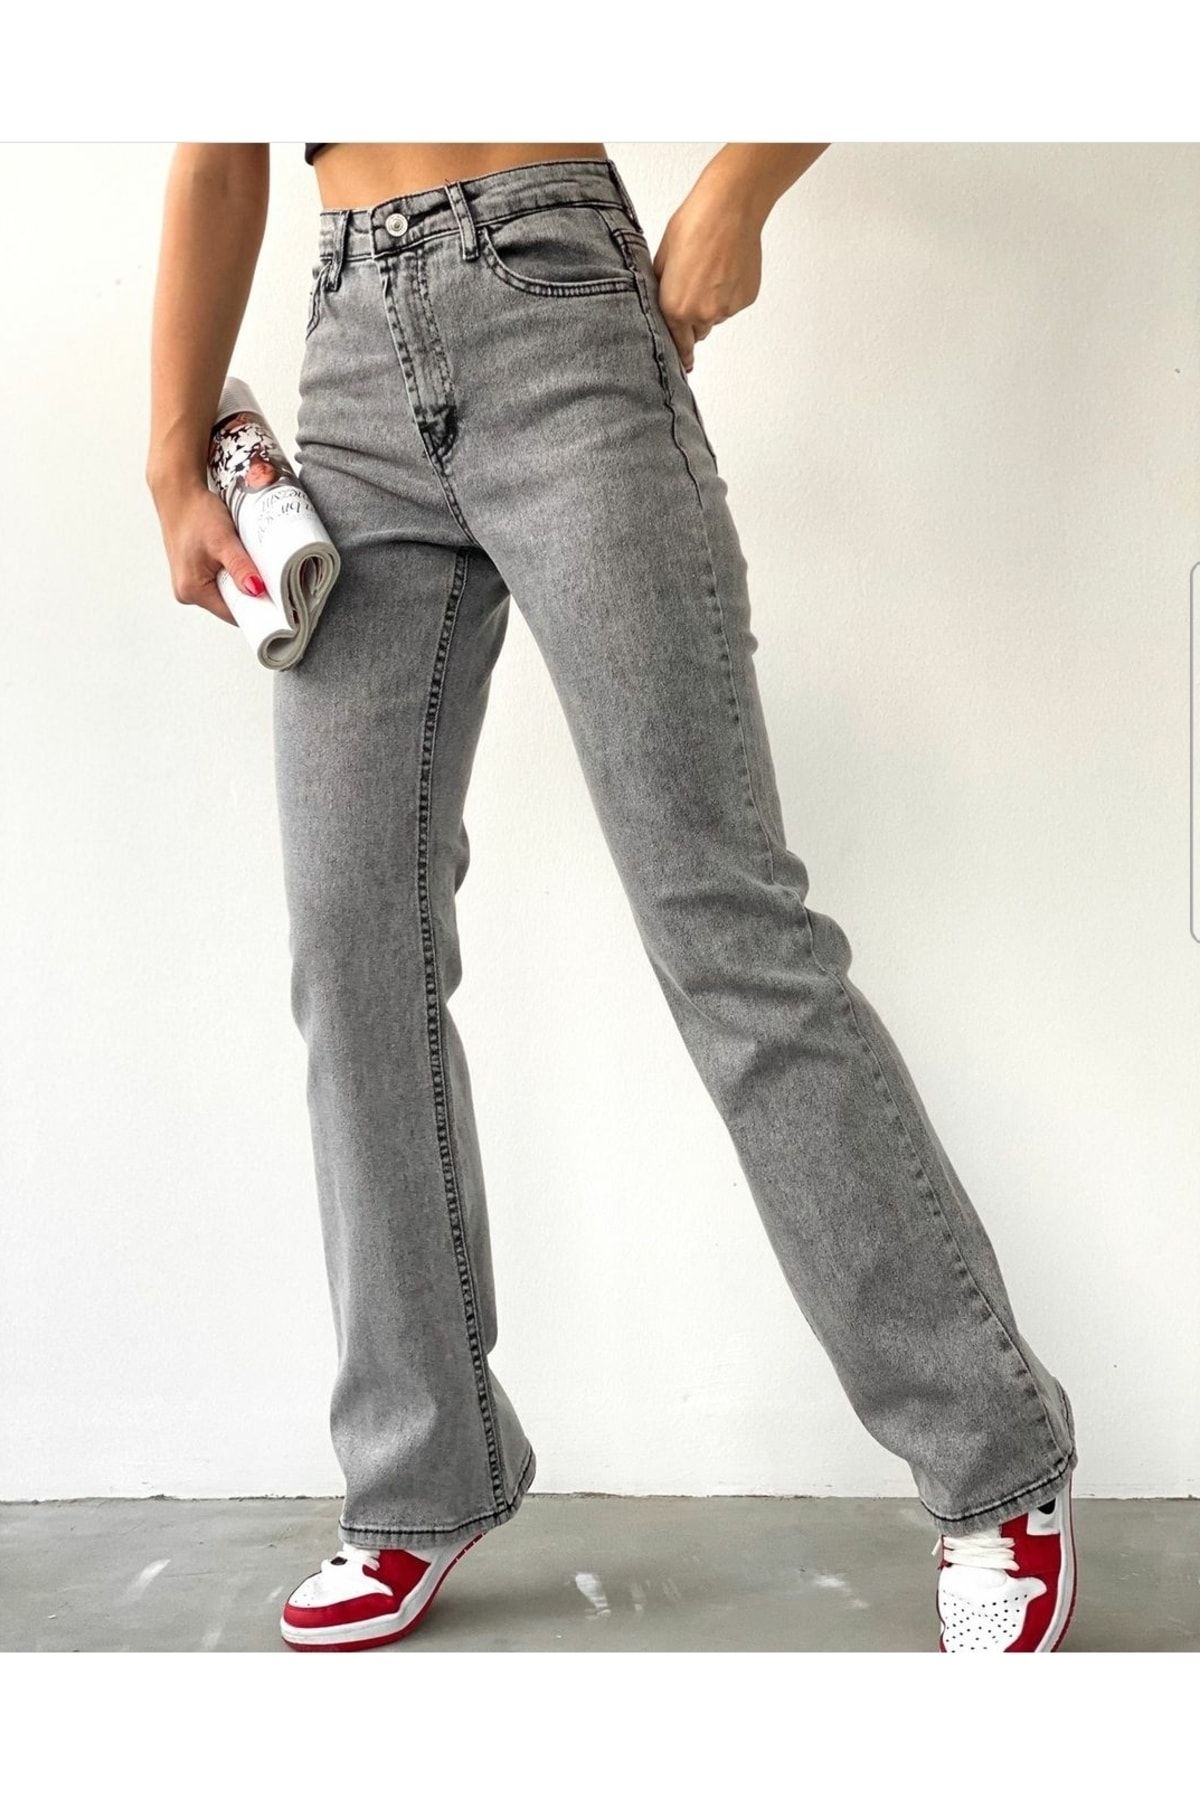 Subdued green/grey cargo pants, low rise baggy fit